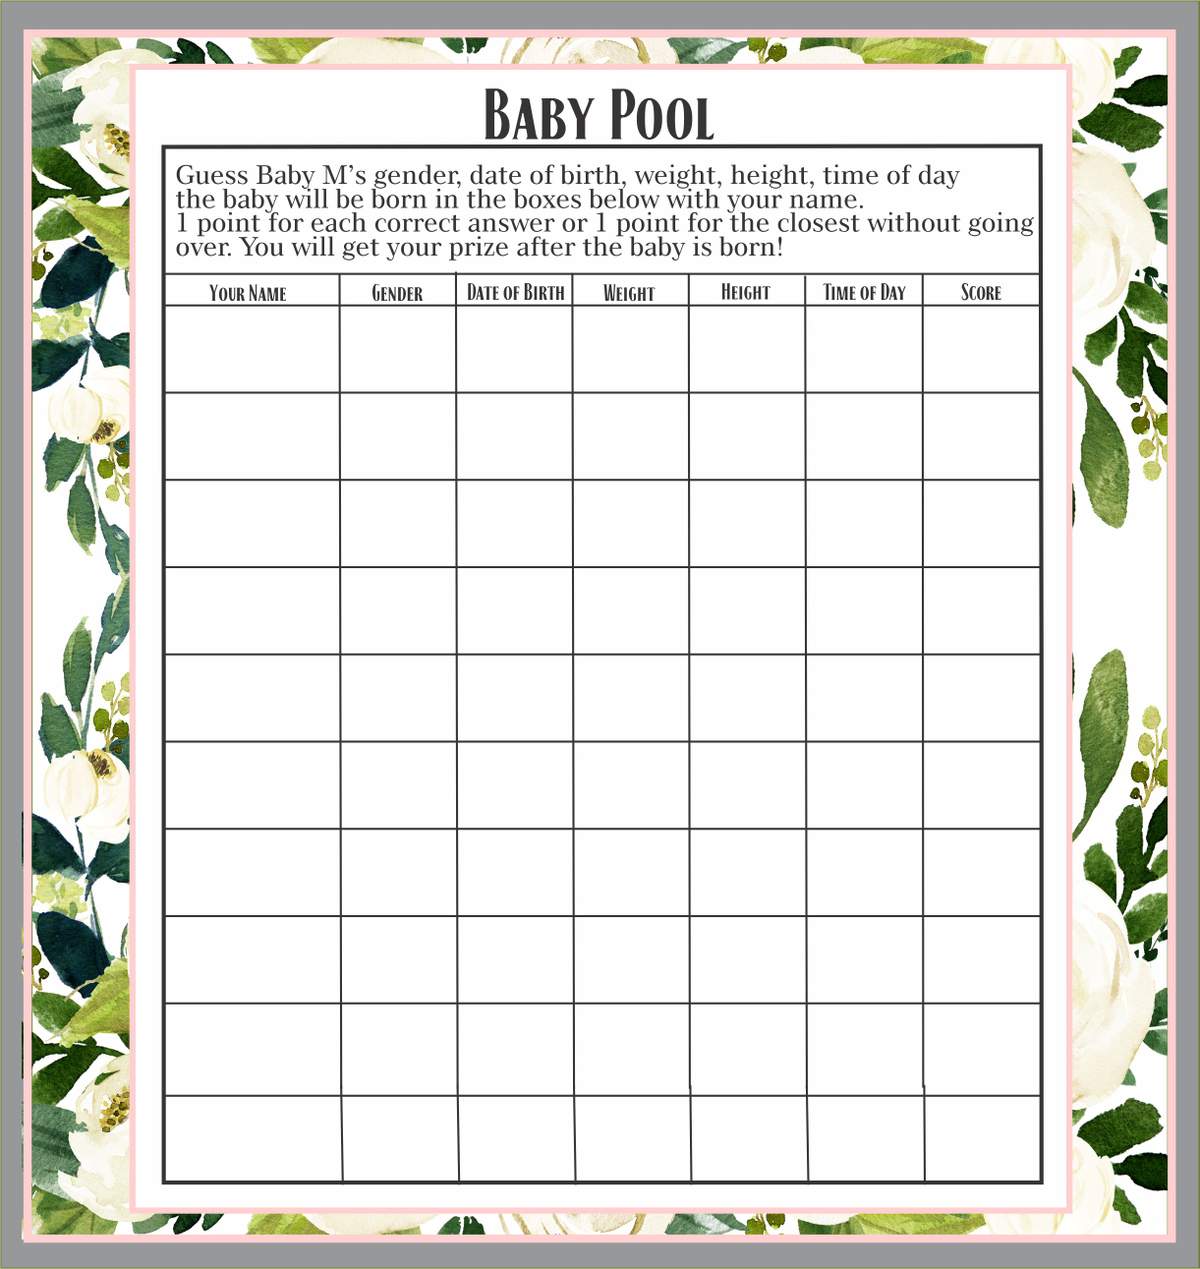 guess the date baby pool for baby shower 49